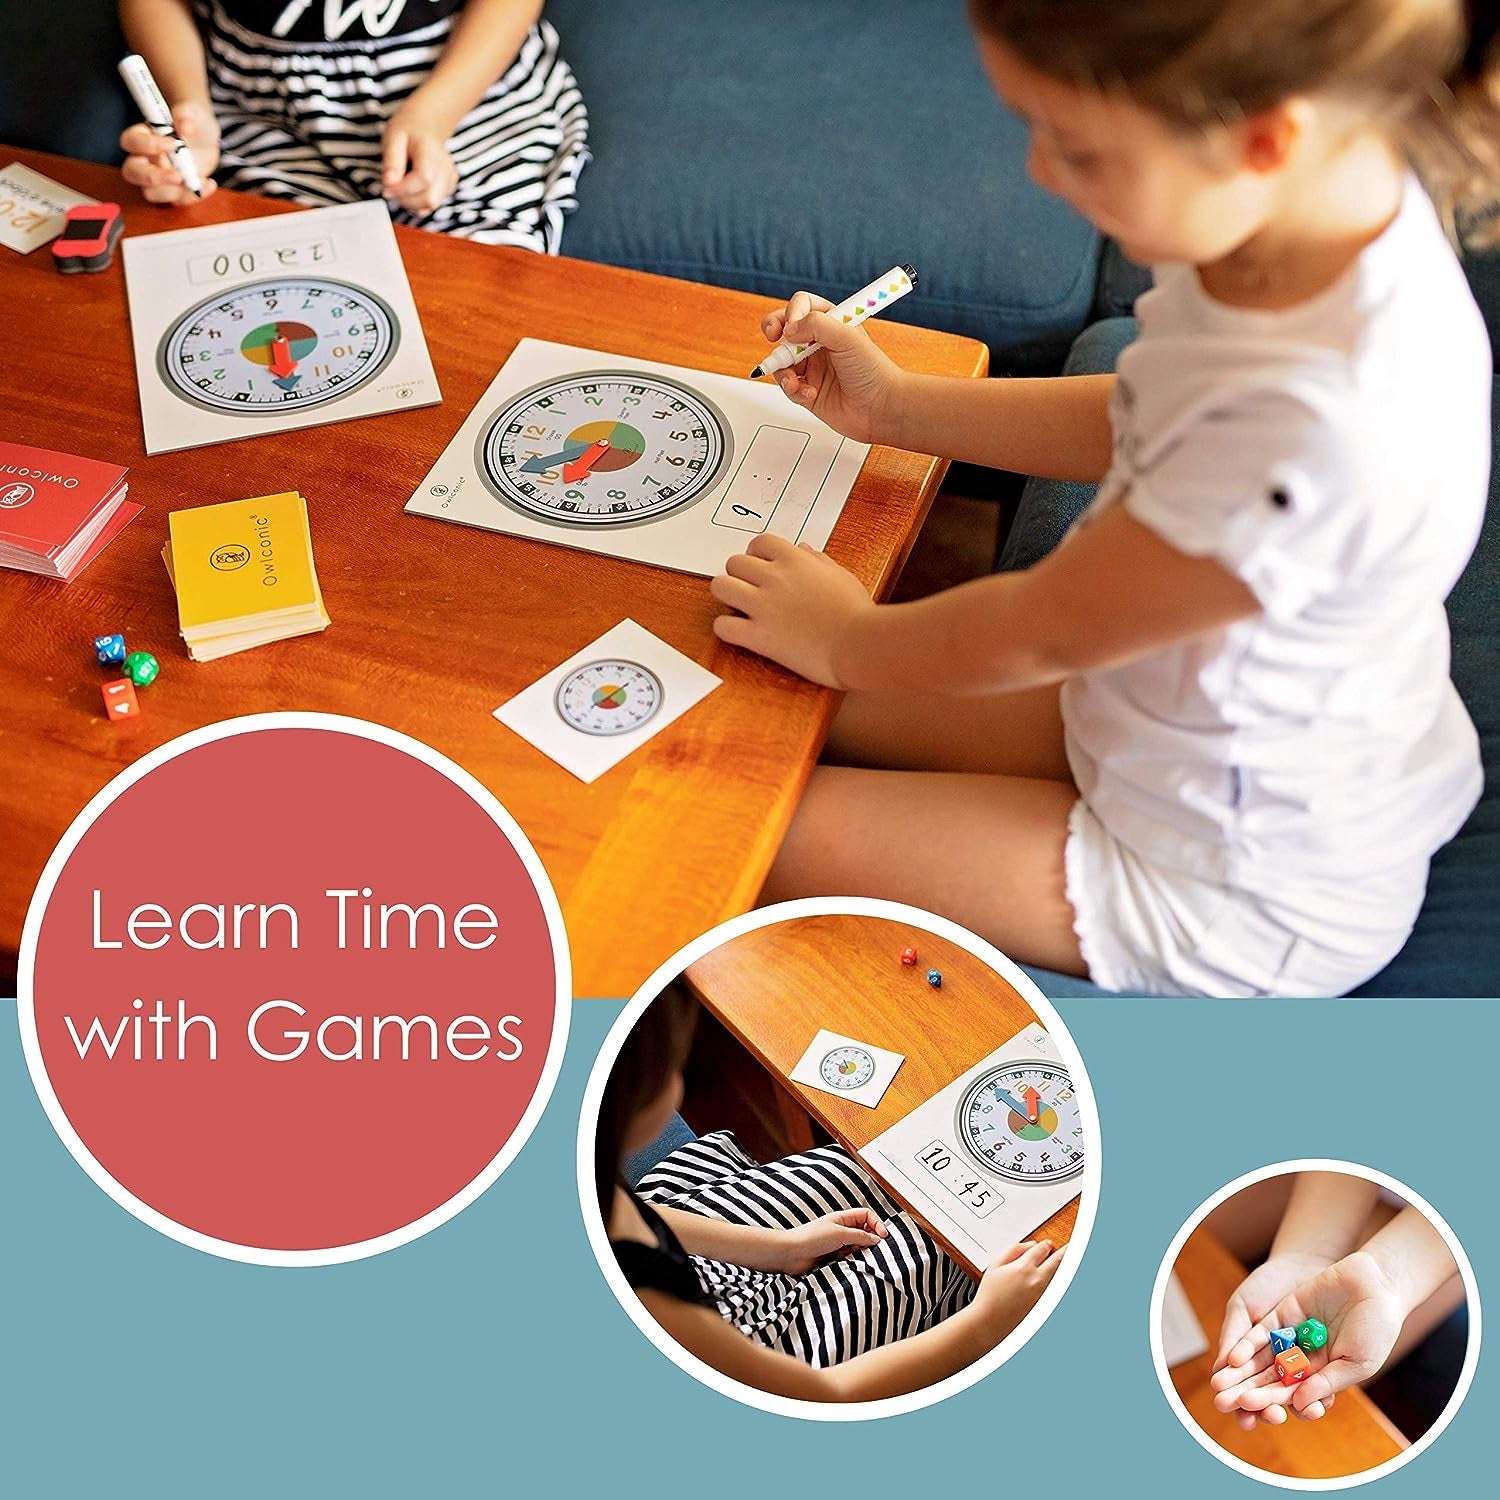 OWLCONIC Learning Time Game - a Great 128 Piece Teaching Aid to Help Kids Learn Analog and Digital Time an Educational Resource Toy for Children - Learning Clock Telling Time Teaching Clock for Kids